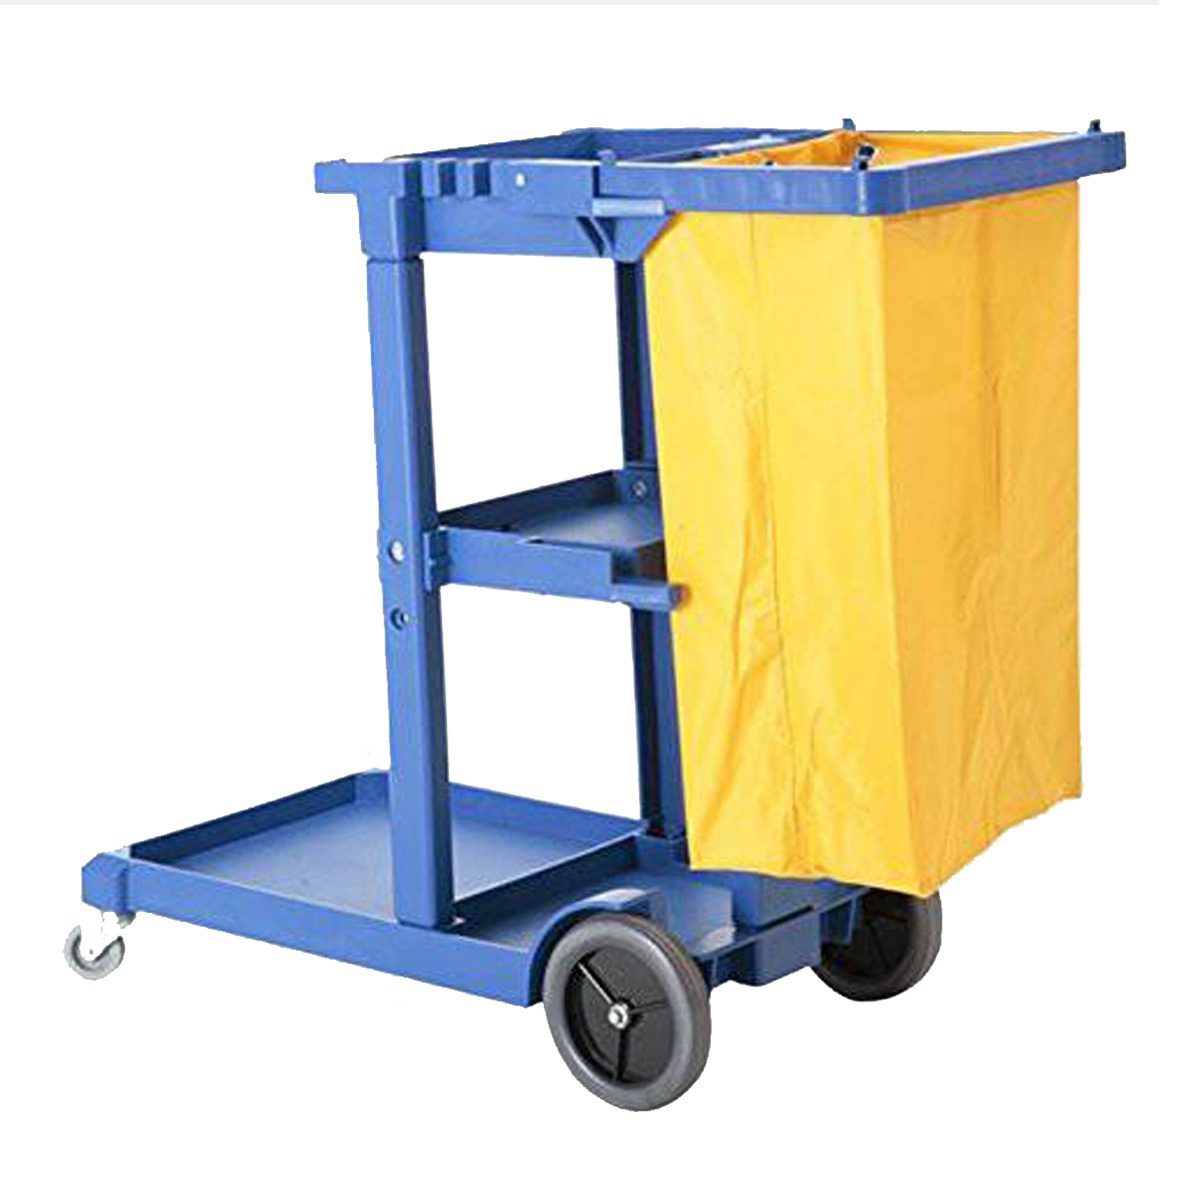 cleaning-equipment-squeegees-and-window-cleaning-filta-janitor-cart-blue-storing+transporting-cleaning-products-equipment-lightweight-easy-mobility-vjs-distributors-MC610S